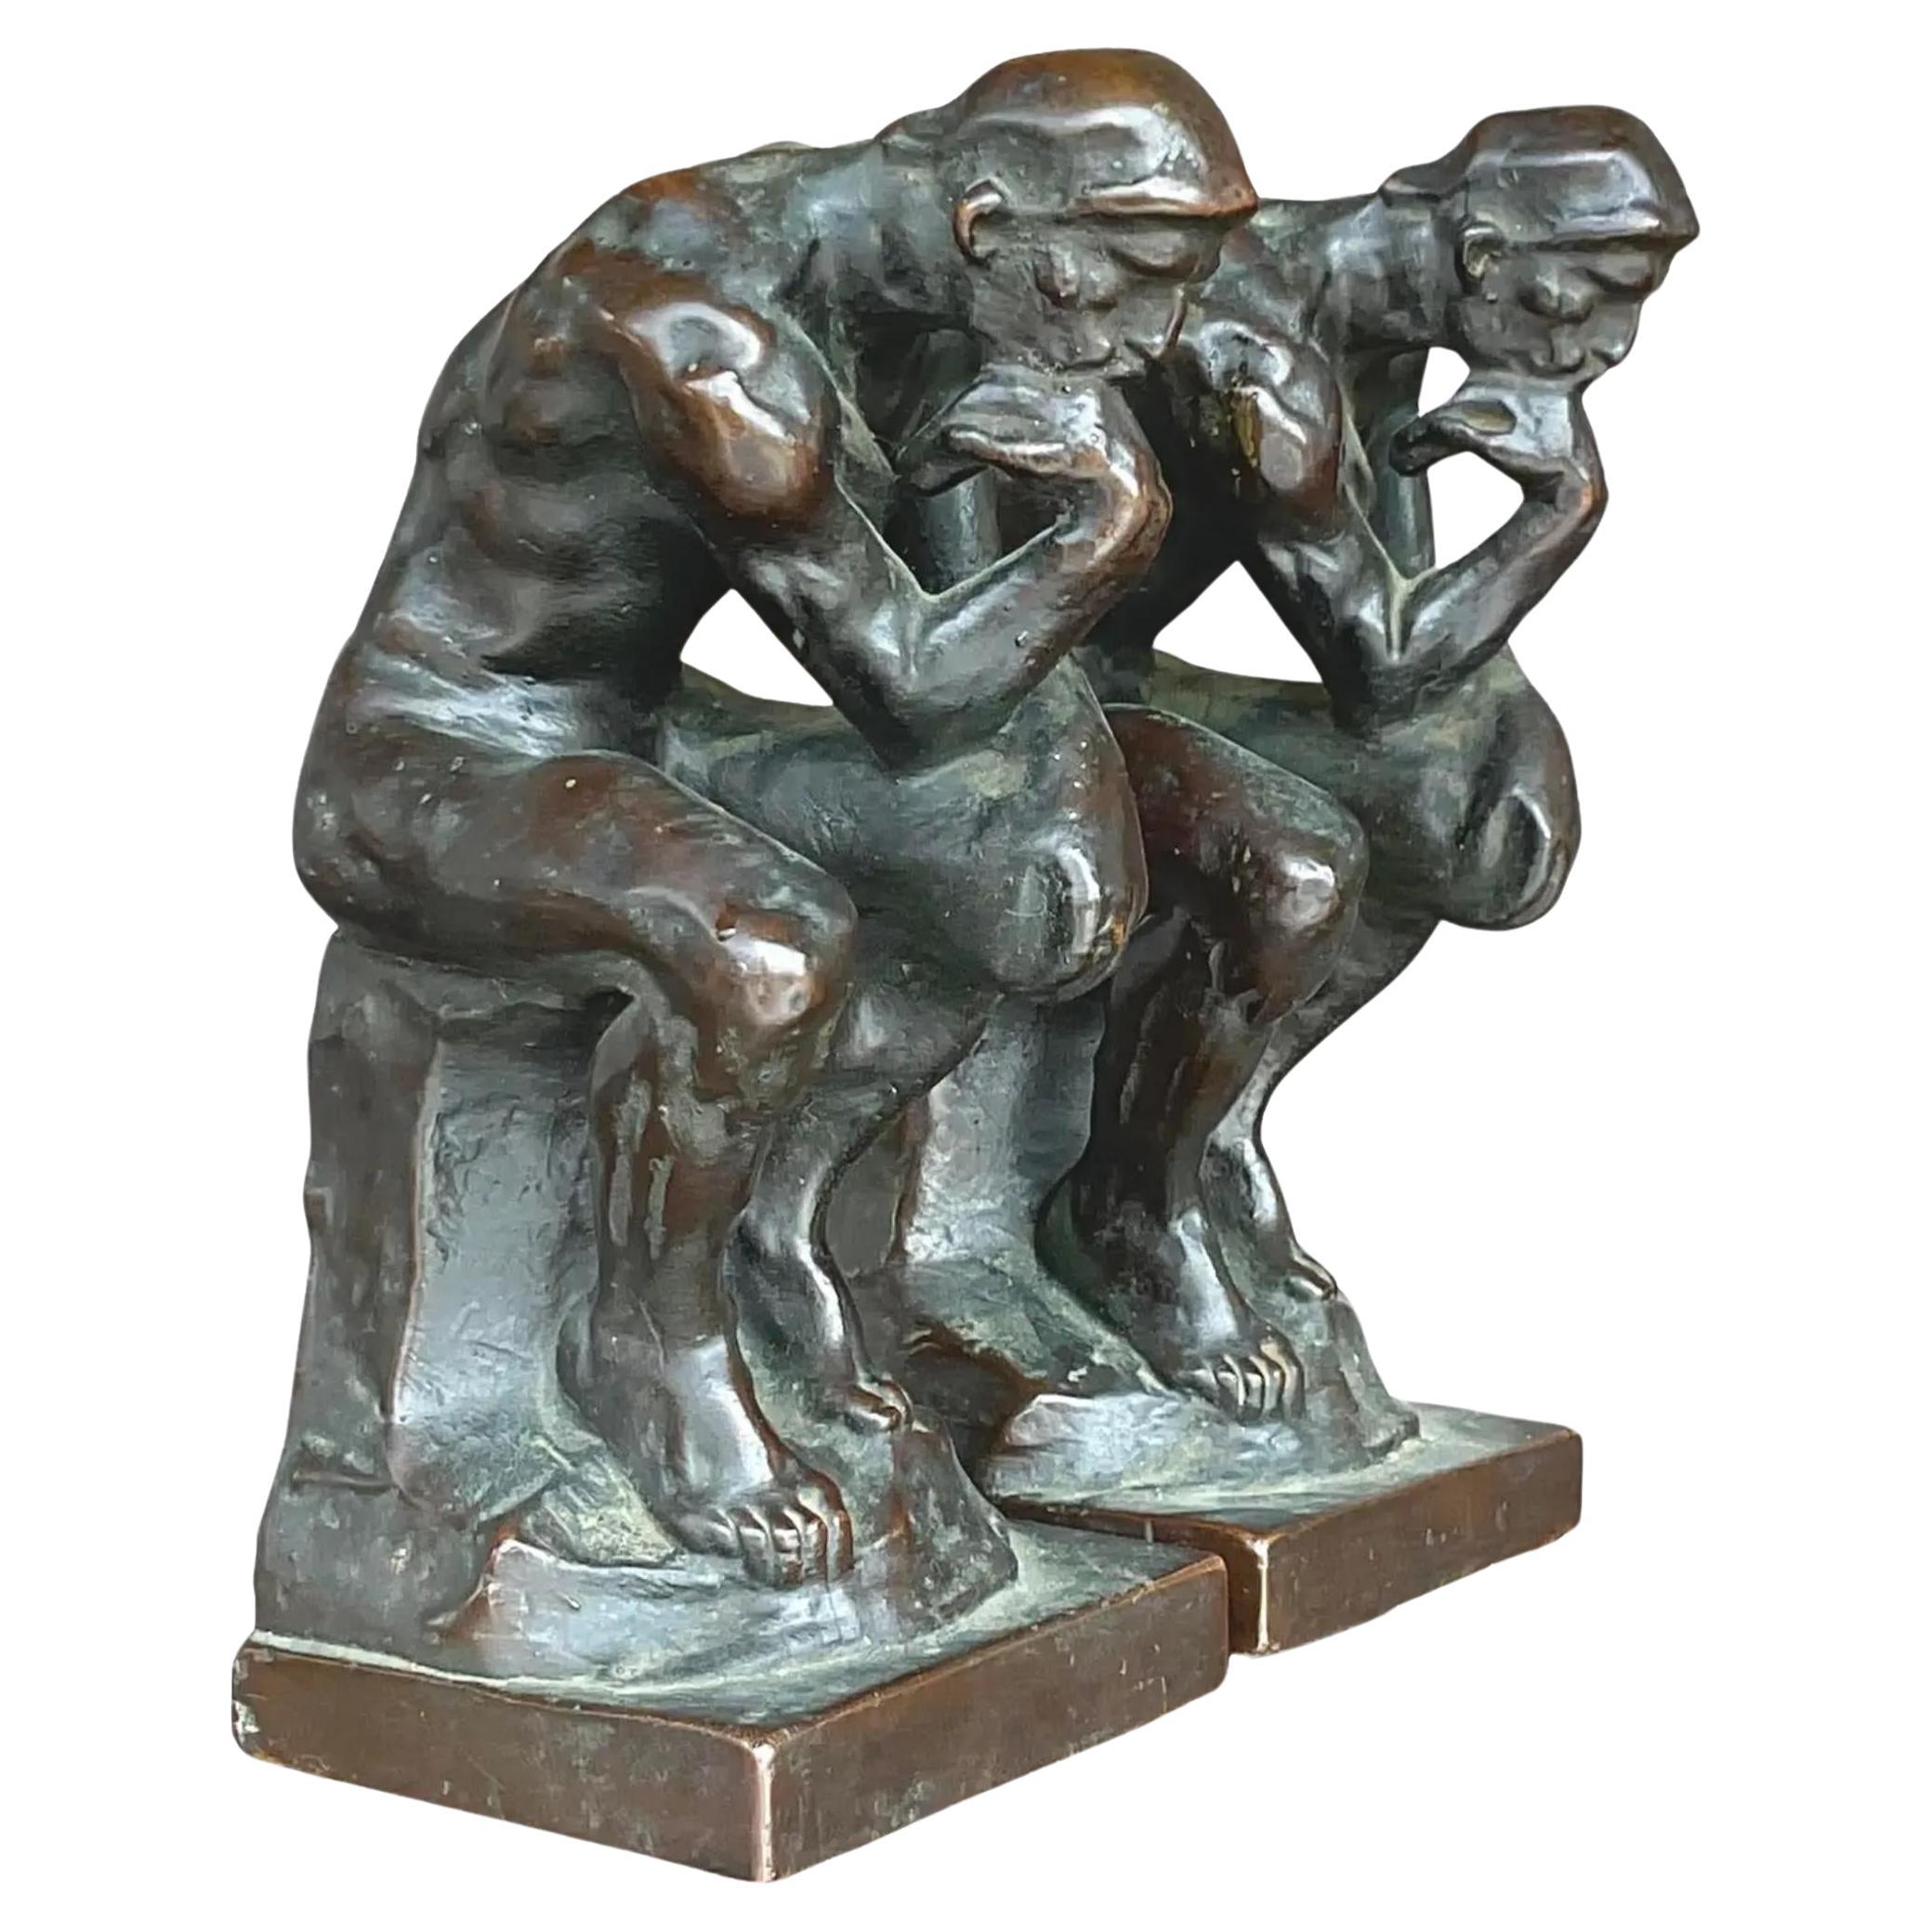 Vintage Regency Patinated Plaster Agusta Rodin “The Thinker” Bookends - a Pair For Sale